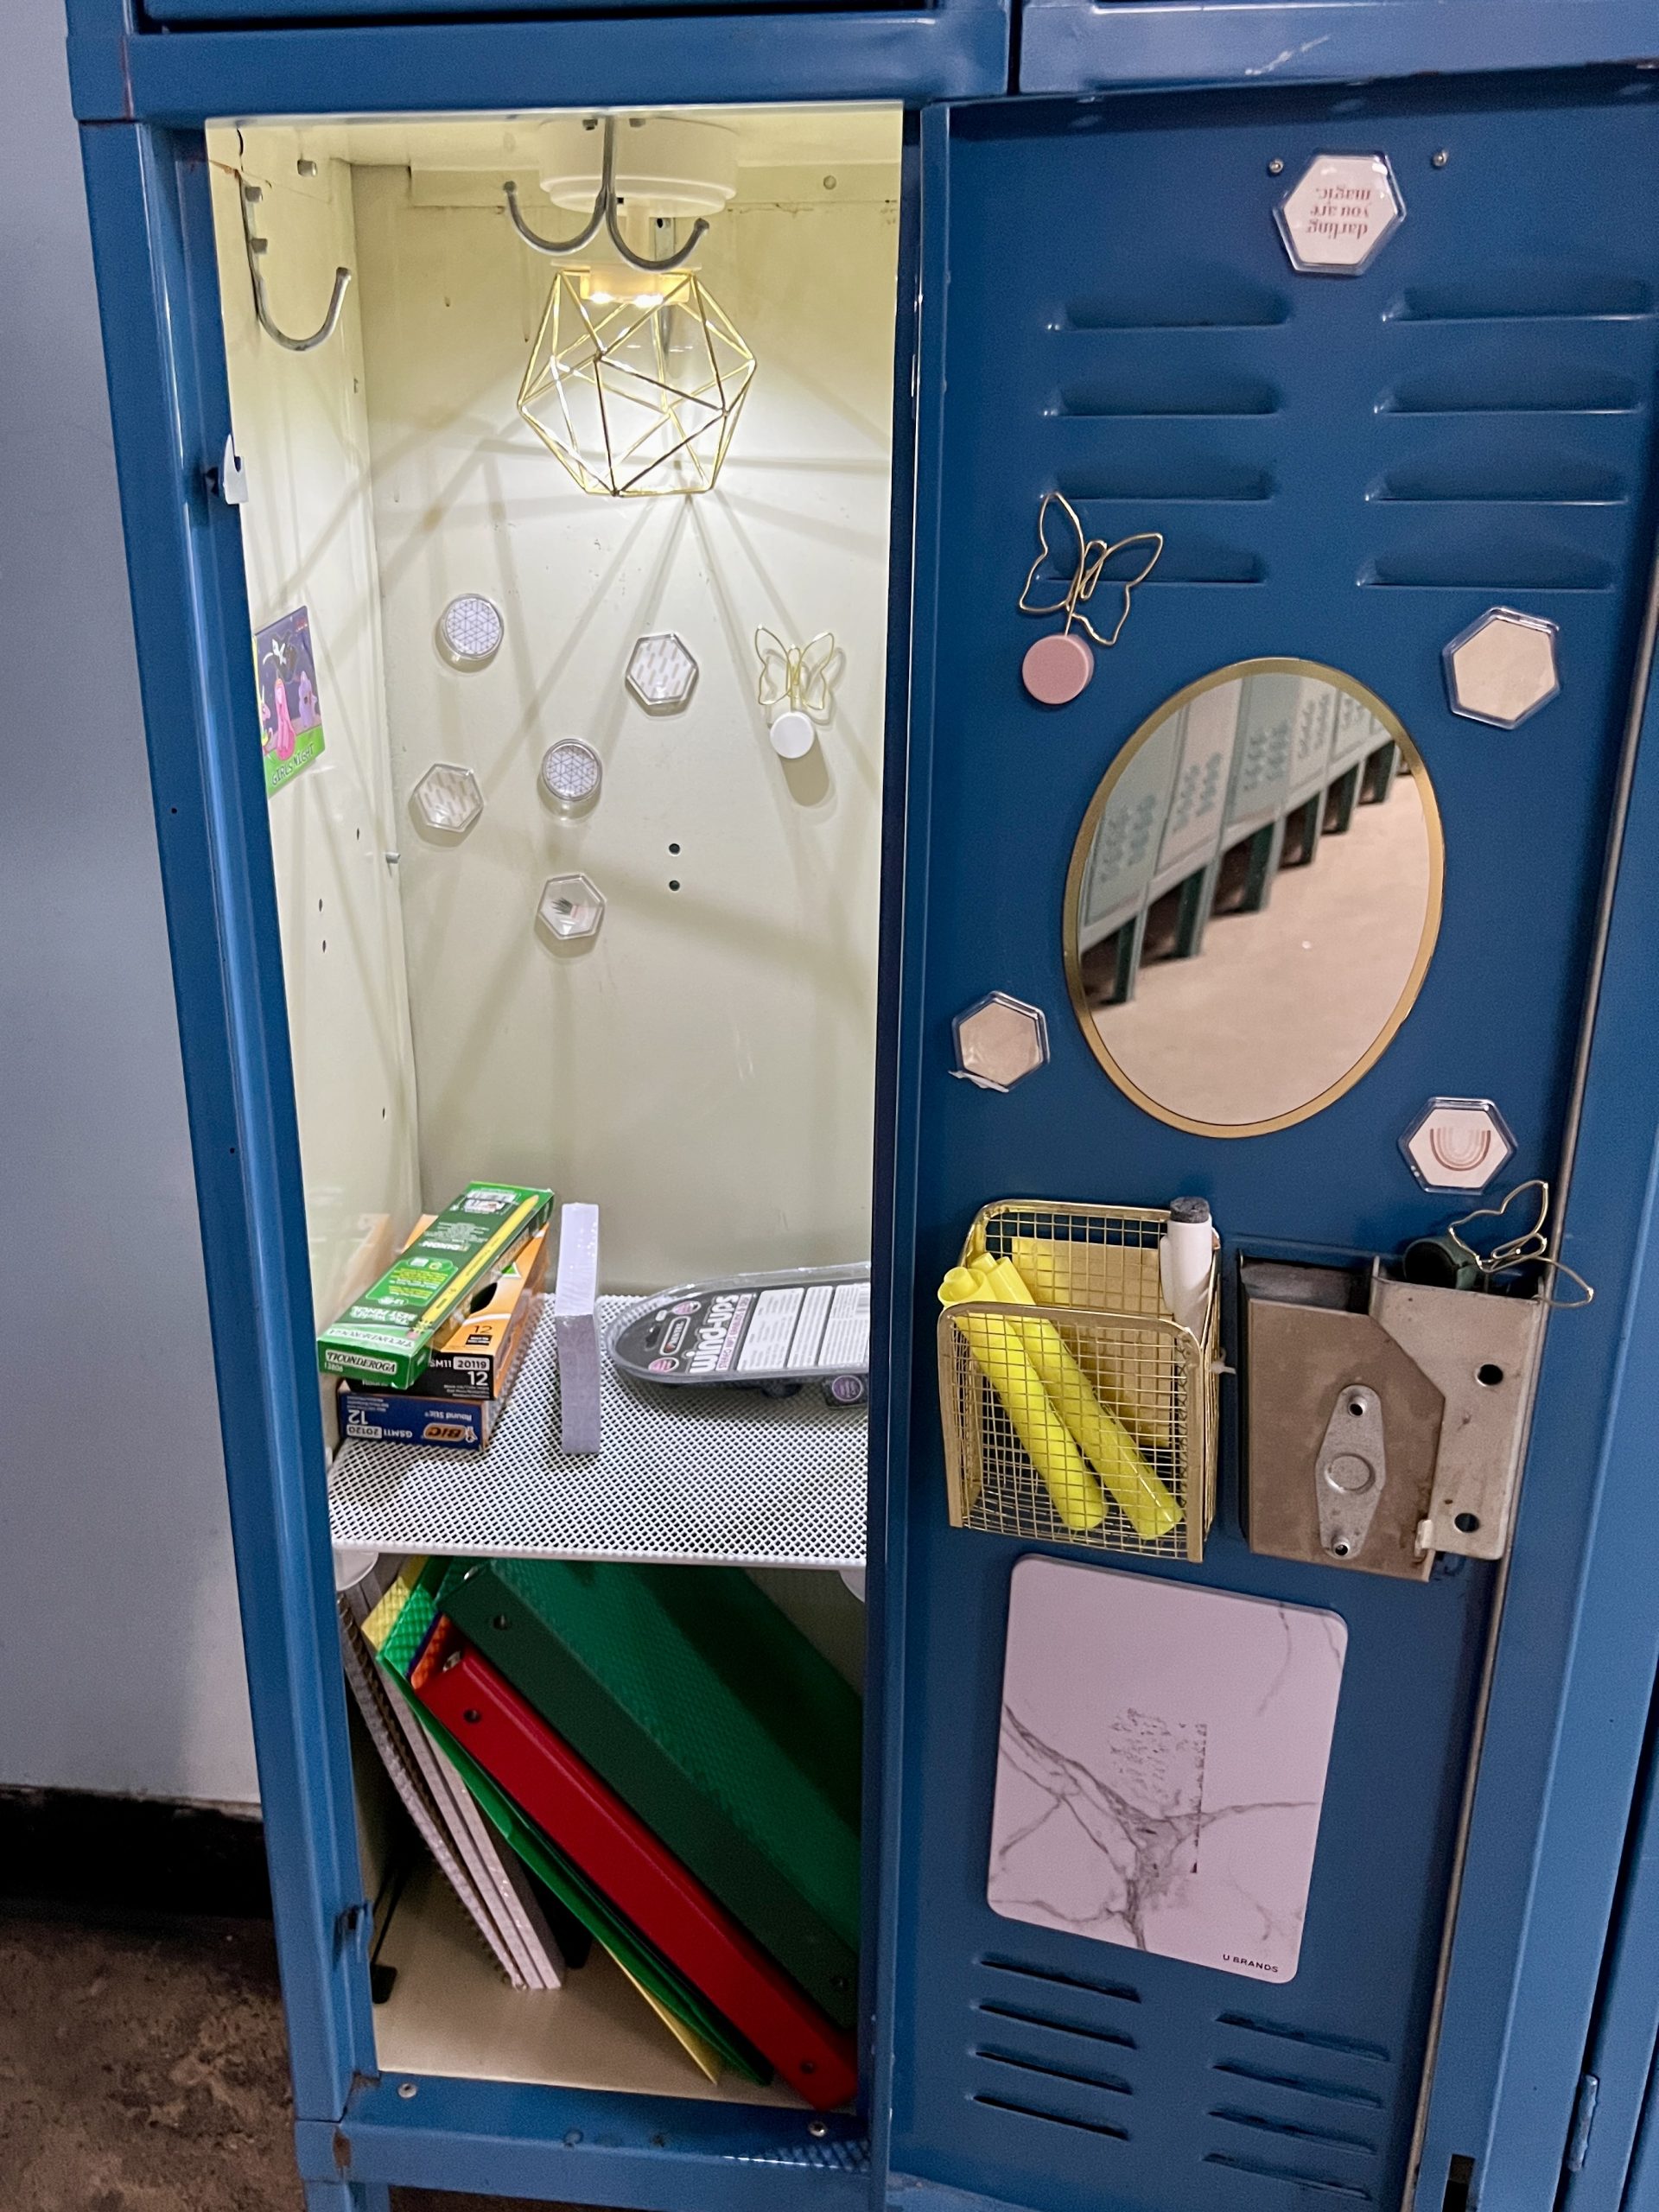 Best Locker Decorations and Accessories - Domesticated Me